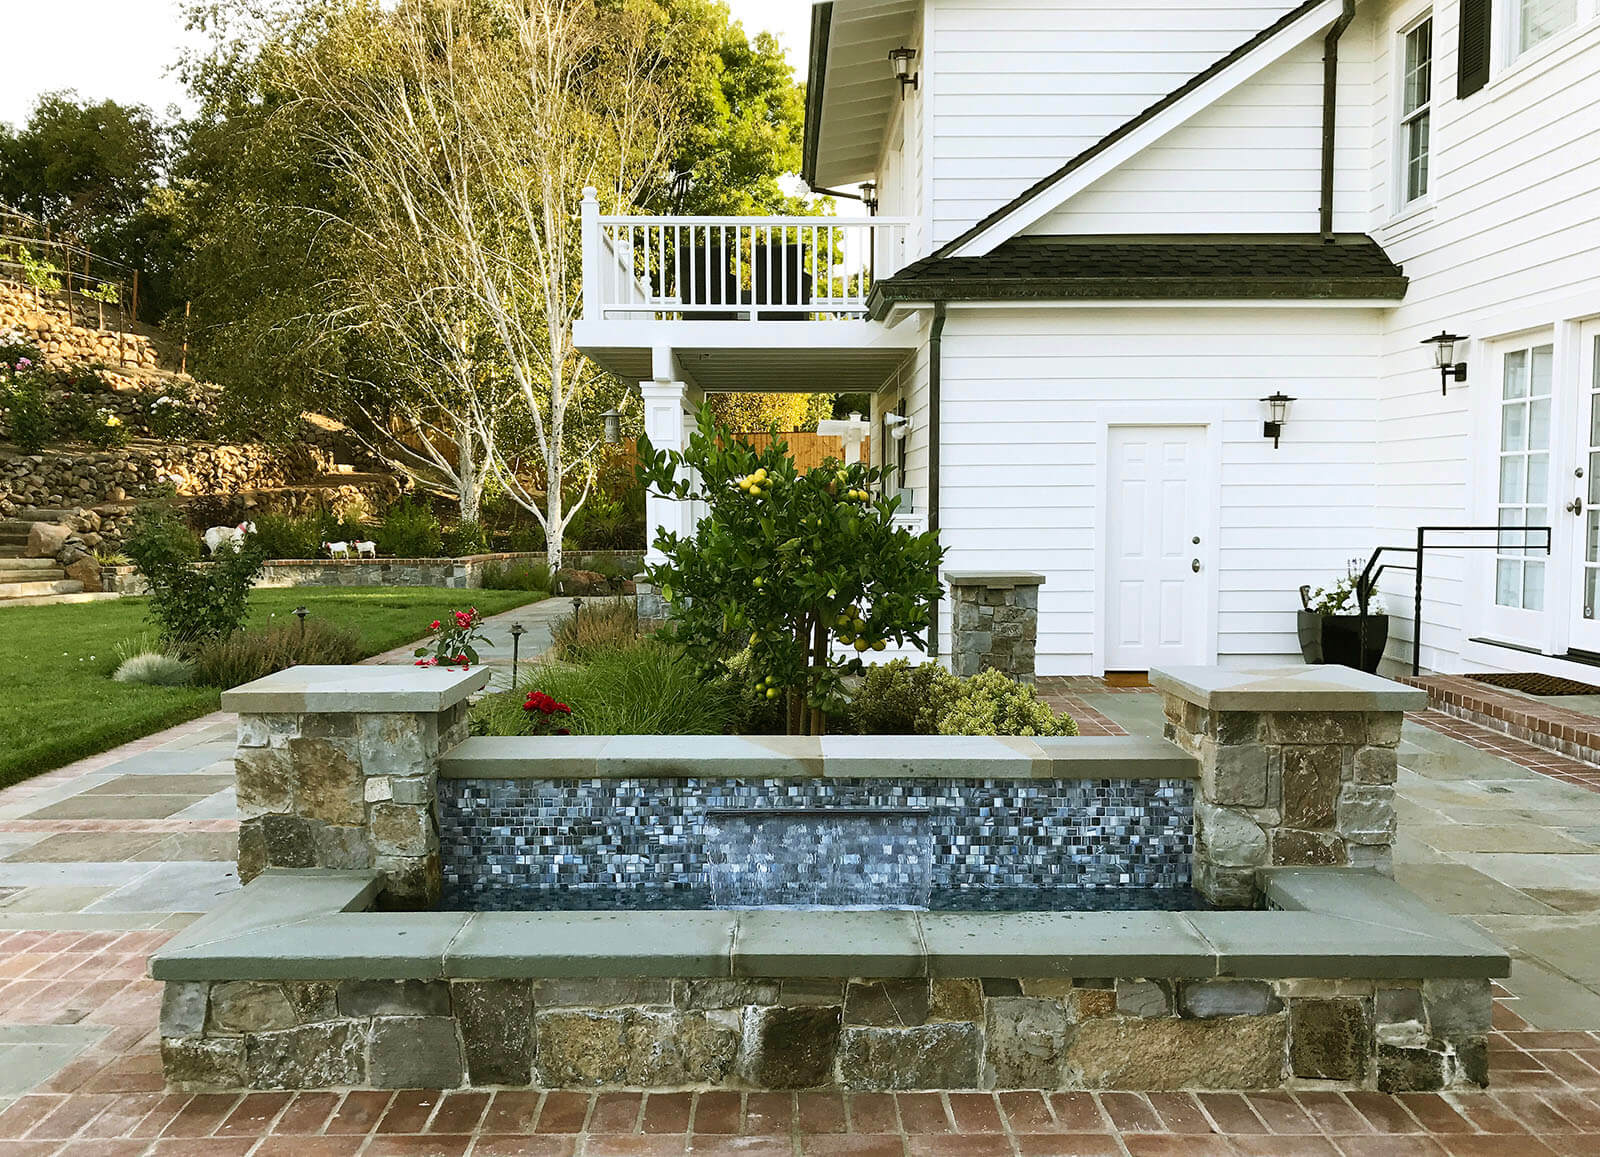 Small mosaic fountain with wrapping stone-edged pool on stone and brick outdoor patio